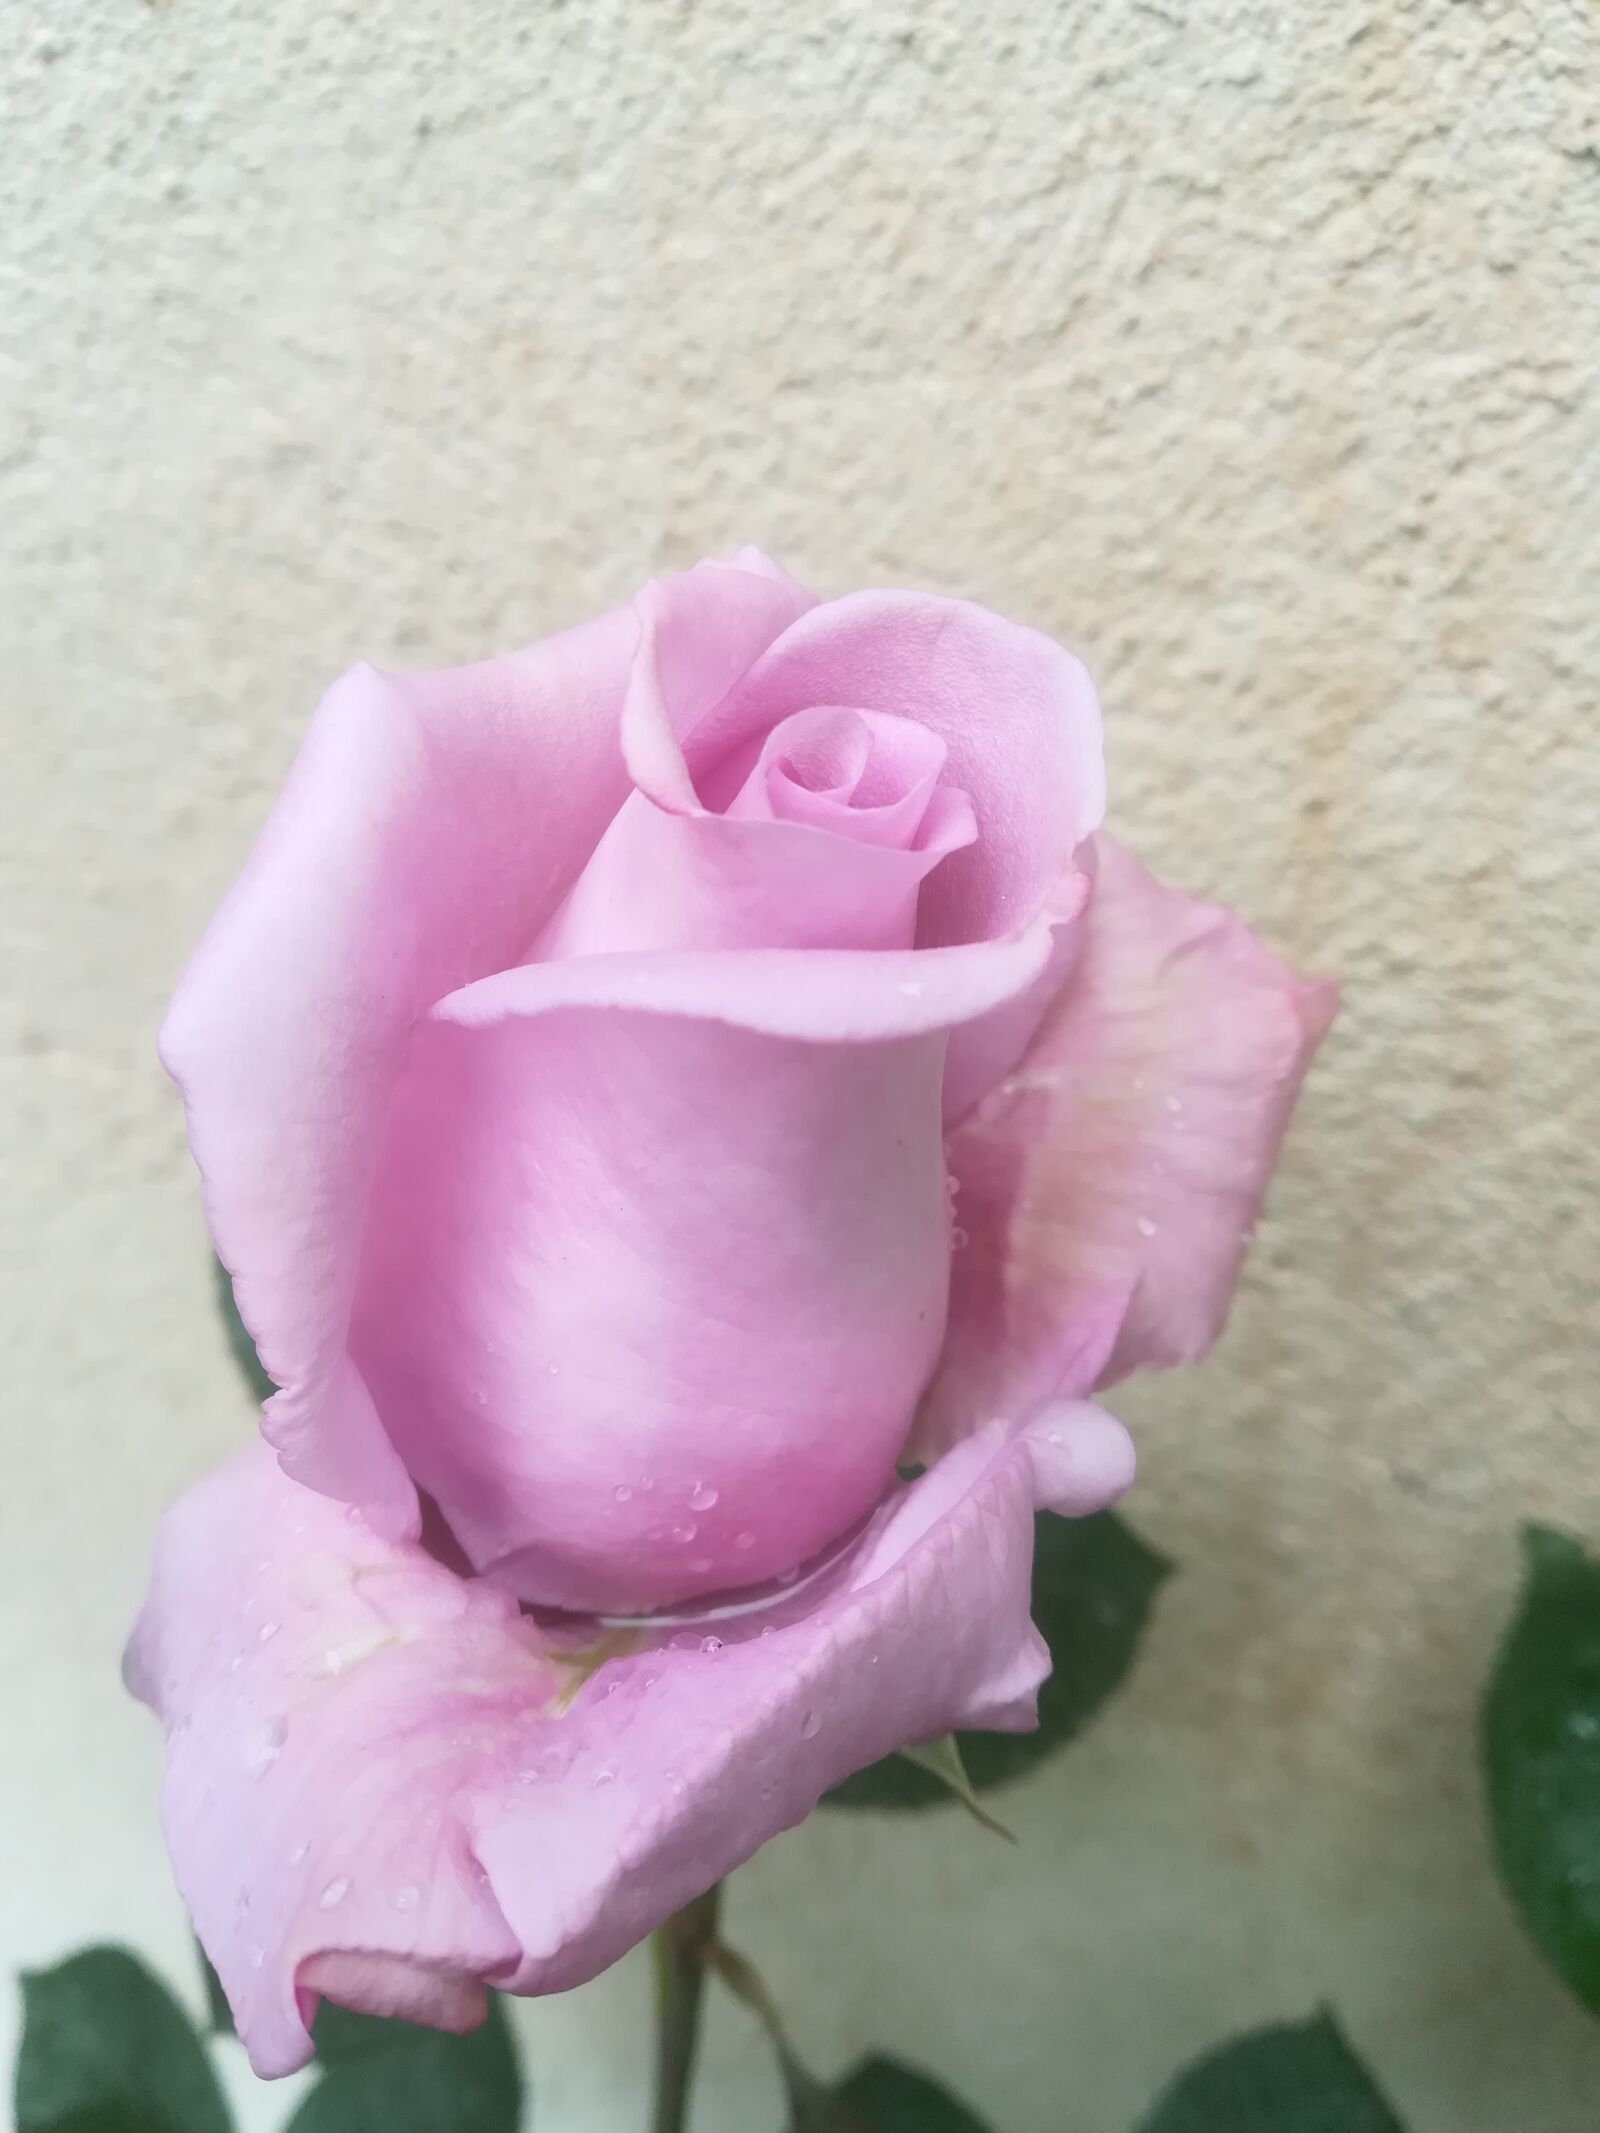 HUAWEI P10 lite sample photo. Rose, purple, color photography